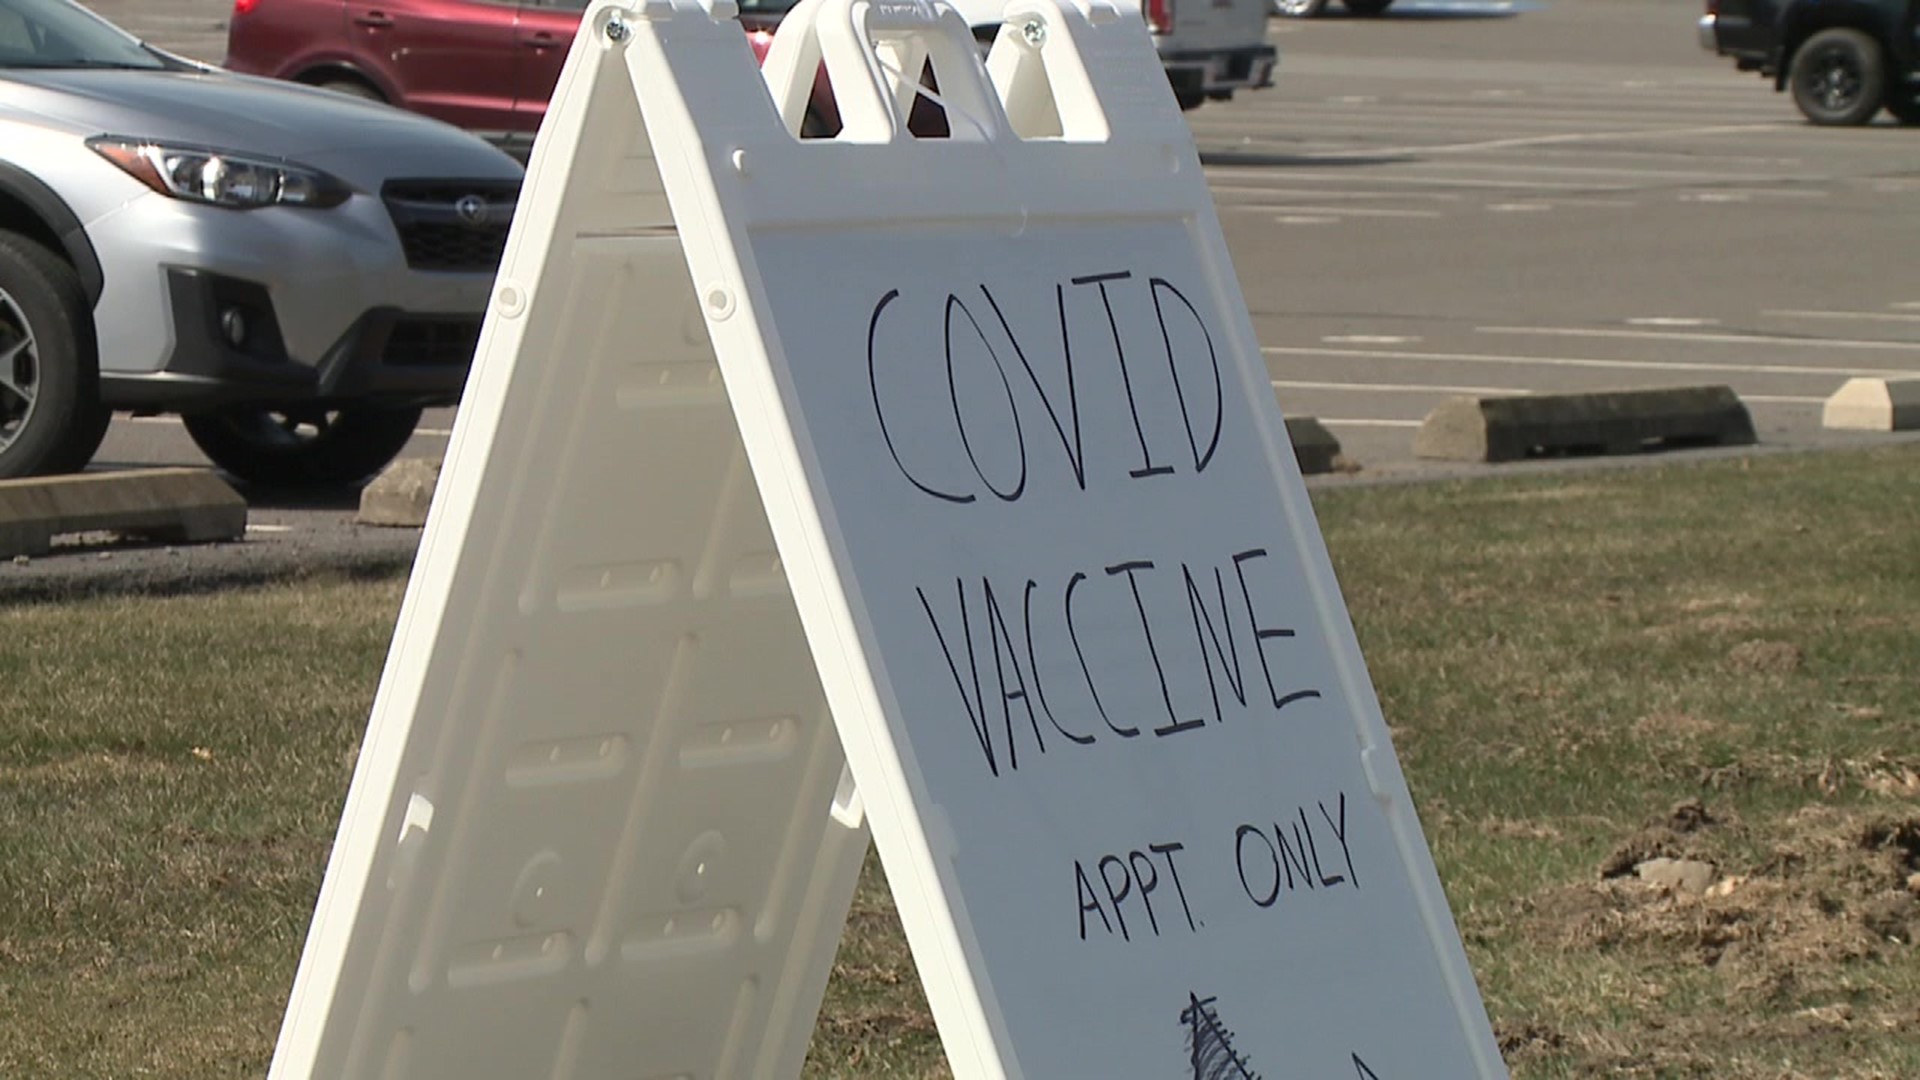 This clinic was held to try to ensure locals had an opportunity to sign up for the vaccine.